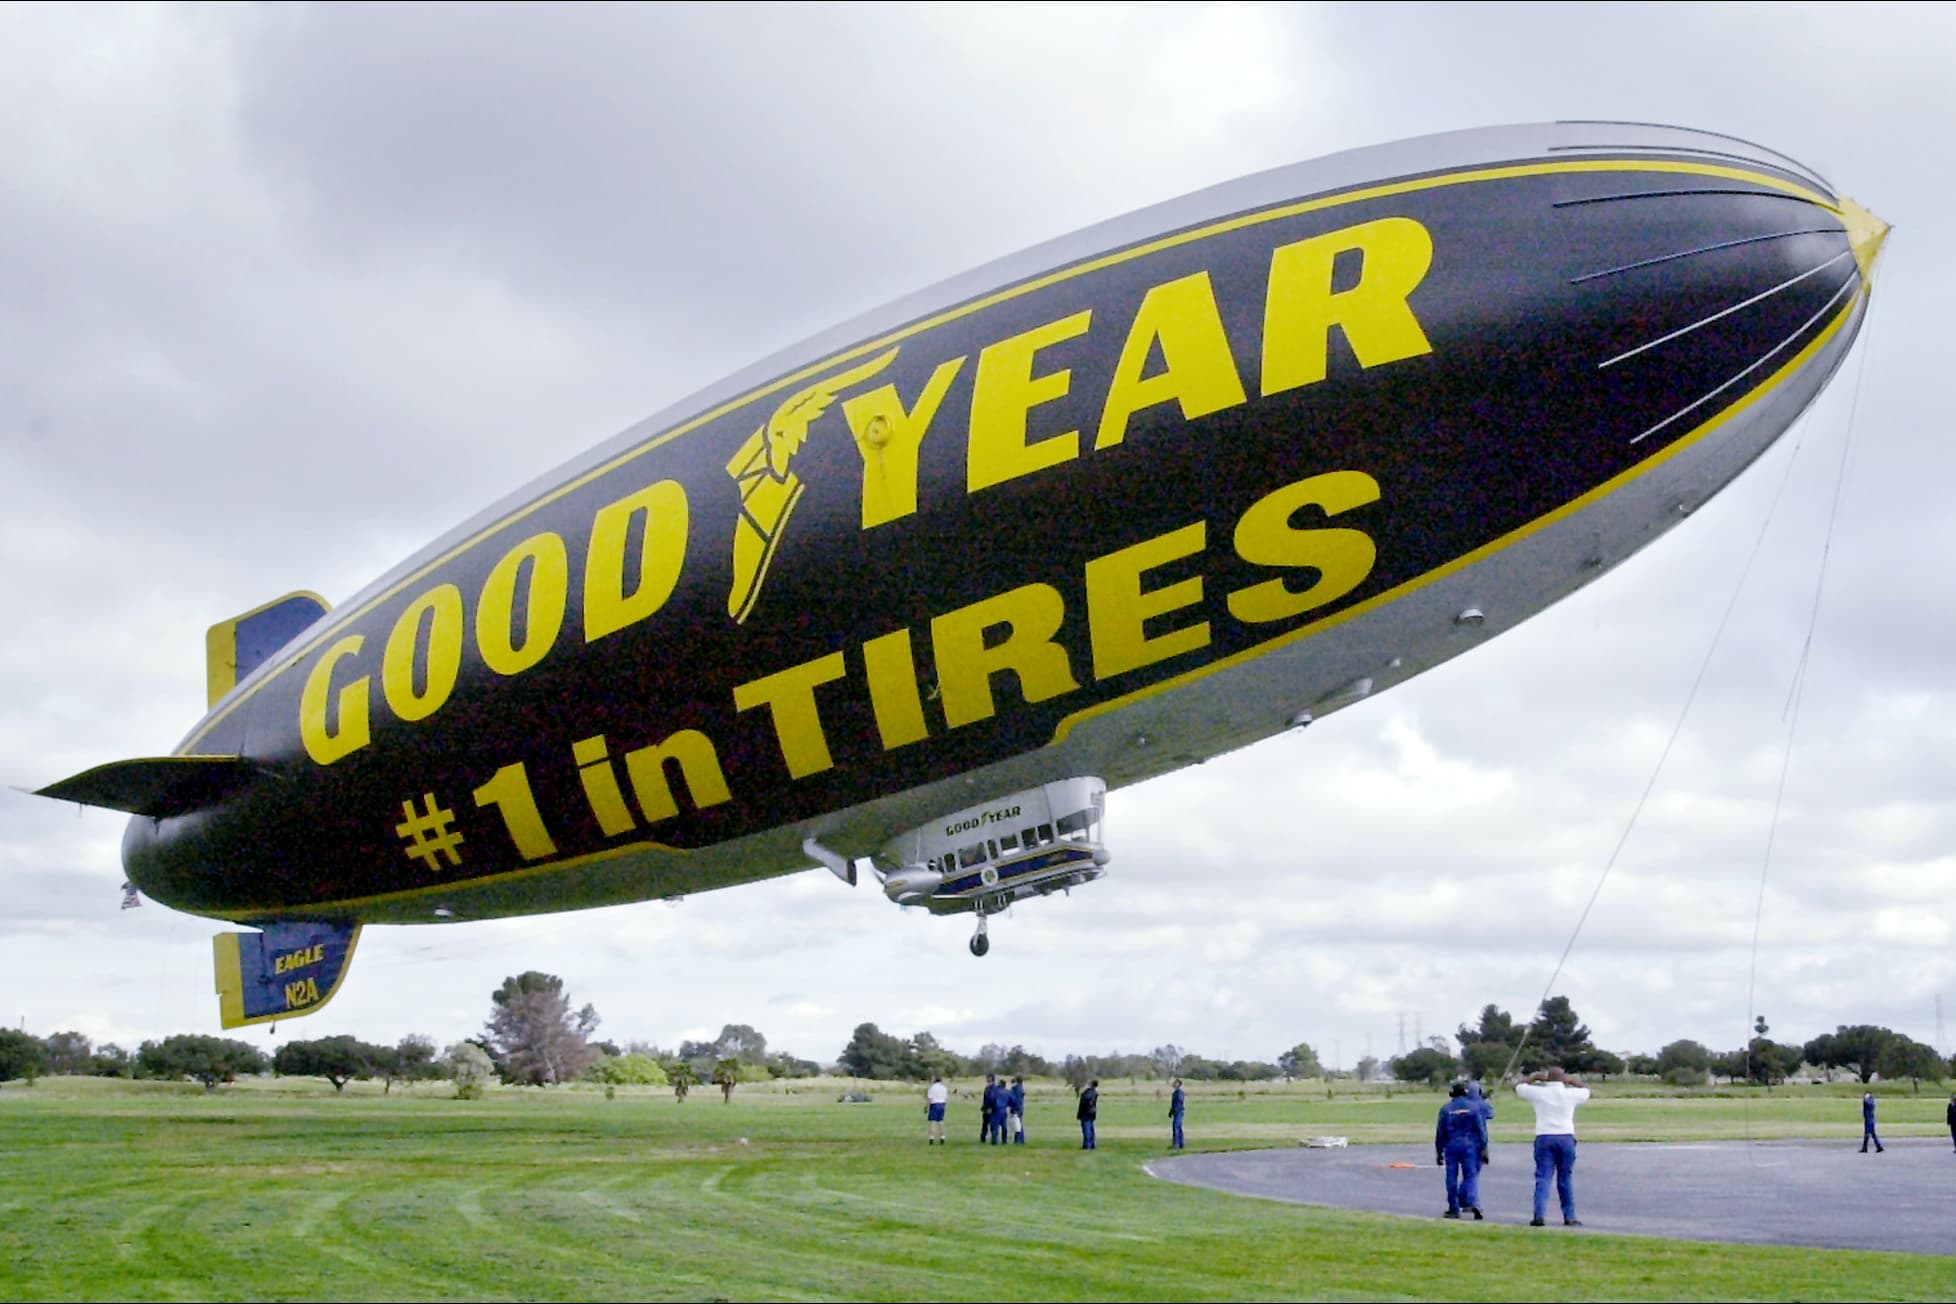 A big blimp may in the sky with people underneath it